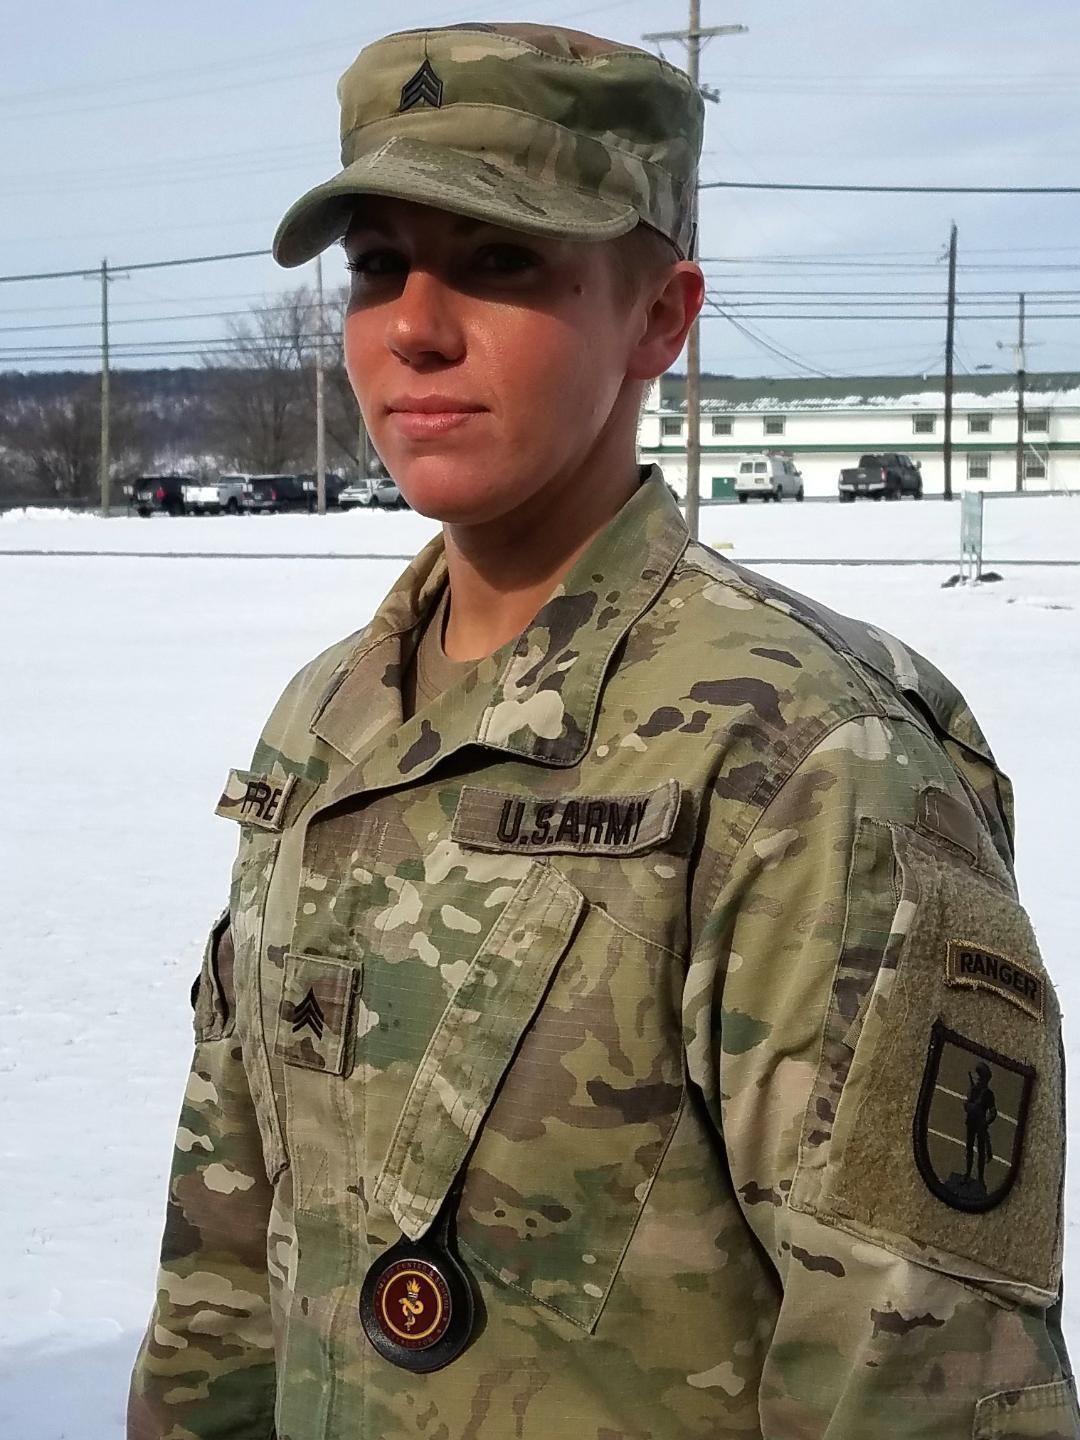 Sgt. Danielle Farber at Fort Indiantown Gap in Lebanon County, Pennsylvania, displays her Ranger tab on Jan. 9, 2020. (<a href="https://www.dvidshub.net/image/6018366/female-pa-guard-soldier-recounts-ranger-school-experience">Brad Rhen</a>/U.S. Army National Guard)